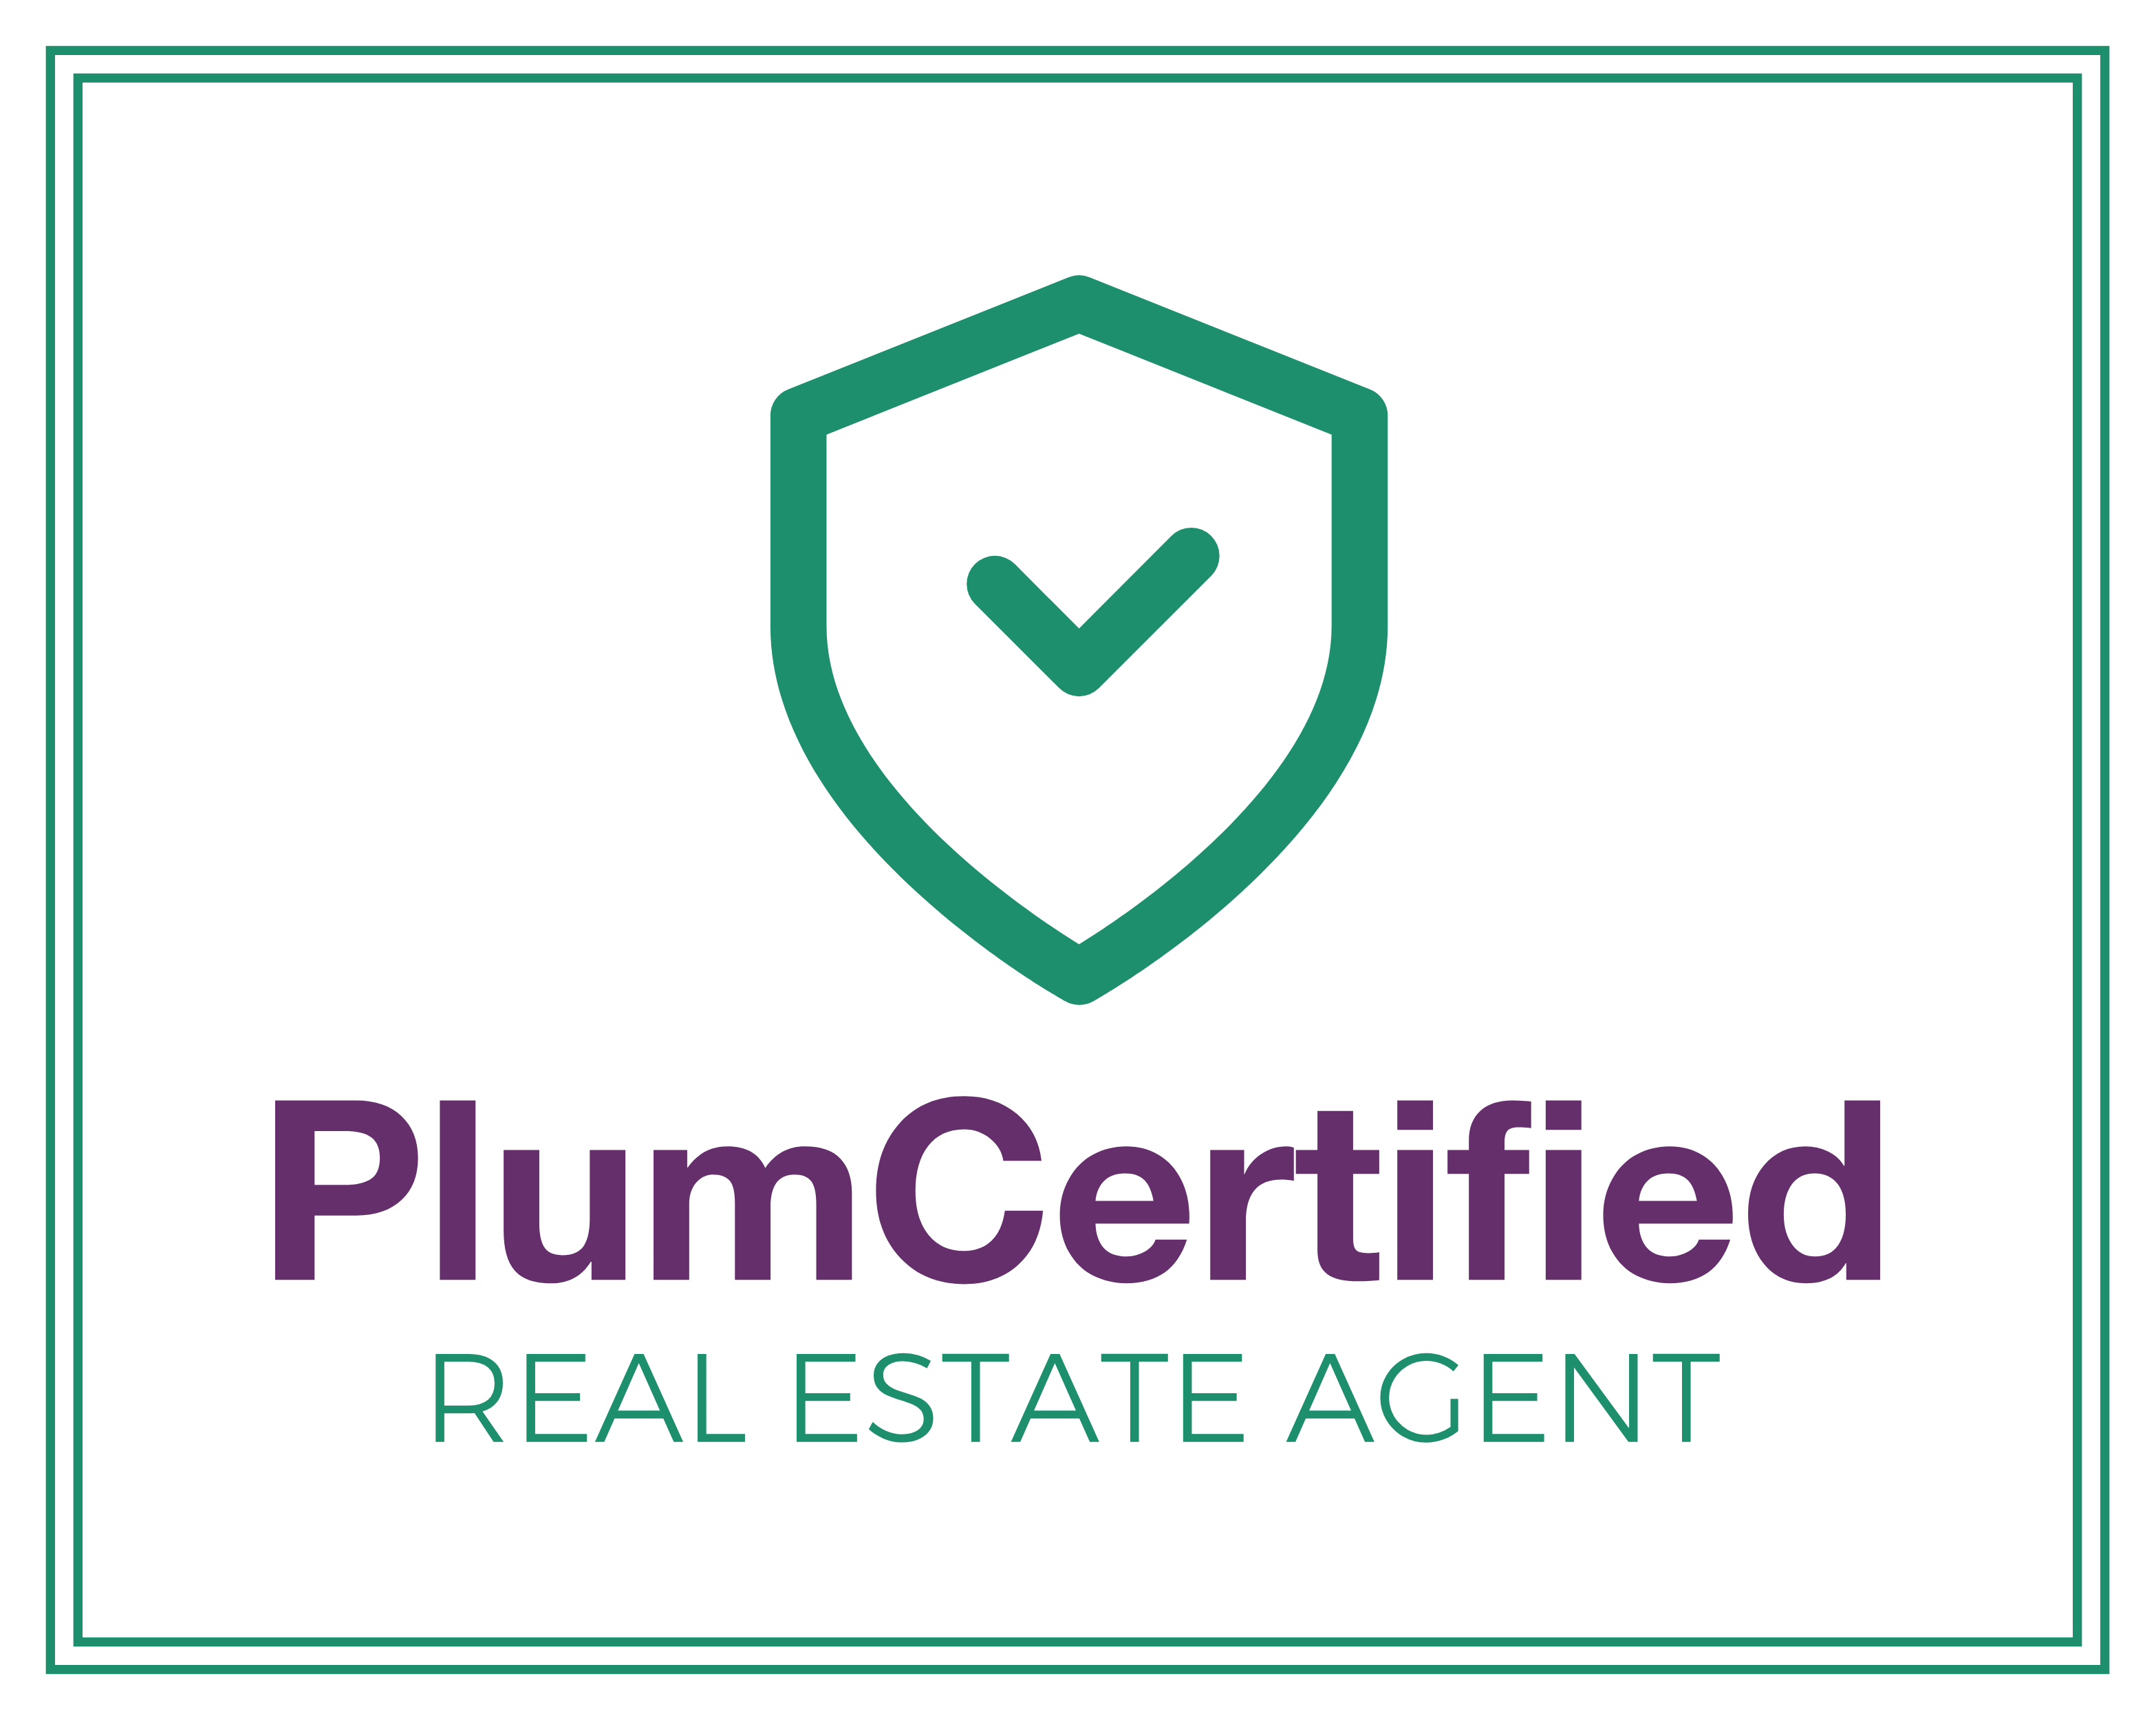 PlumCertified Real Estate Agent for co-ownership vacation homes logo in green and purple.